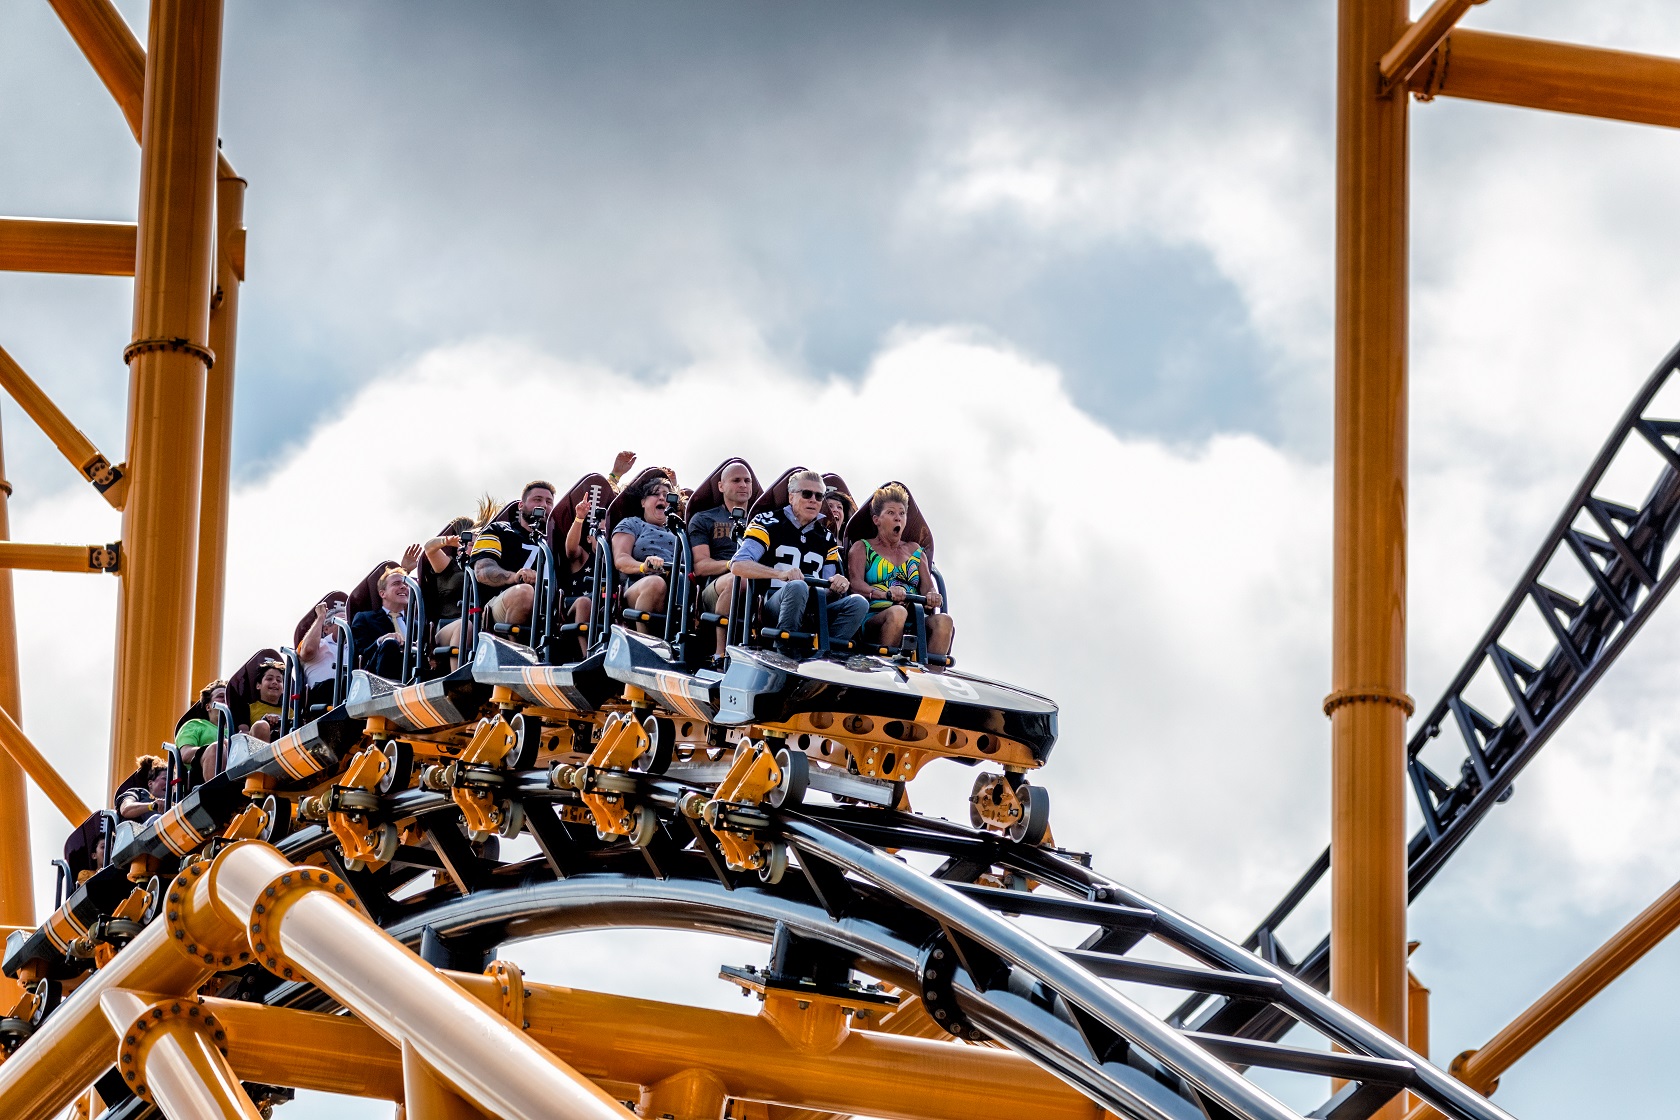 Four-time Super Bowl Champion Mike Wagner braces himself on The Steel Curtain roller coaster at Kennywood Park on July 12, 2019.